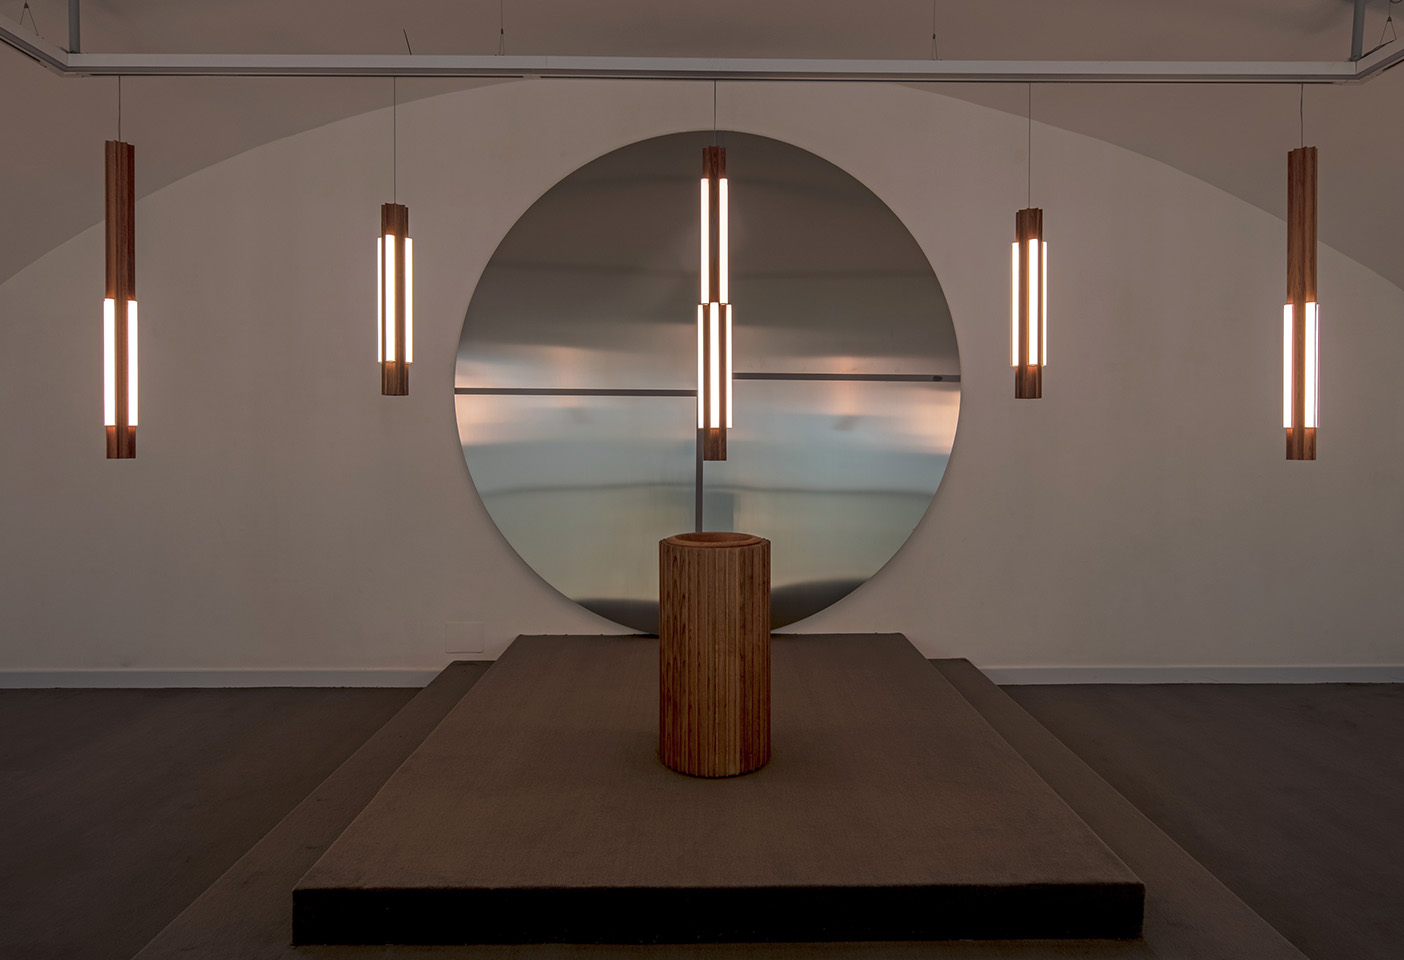 'Altar' references the angular forms of mid-century churches and altars, carved from solid oak and completed with an illuminated tube nestled in its architectural grooves. Photo c/o Lee Broom. 